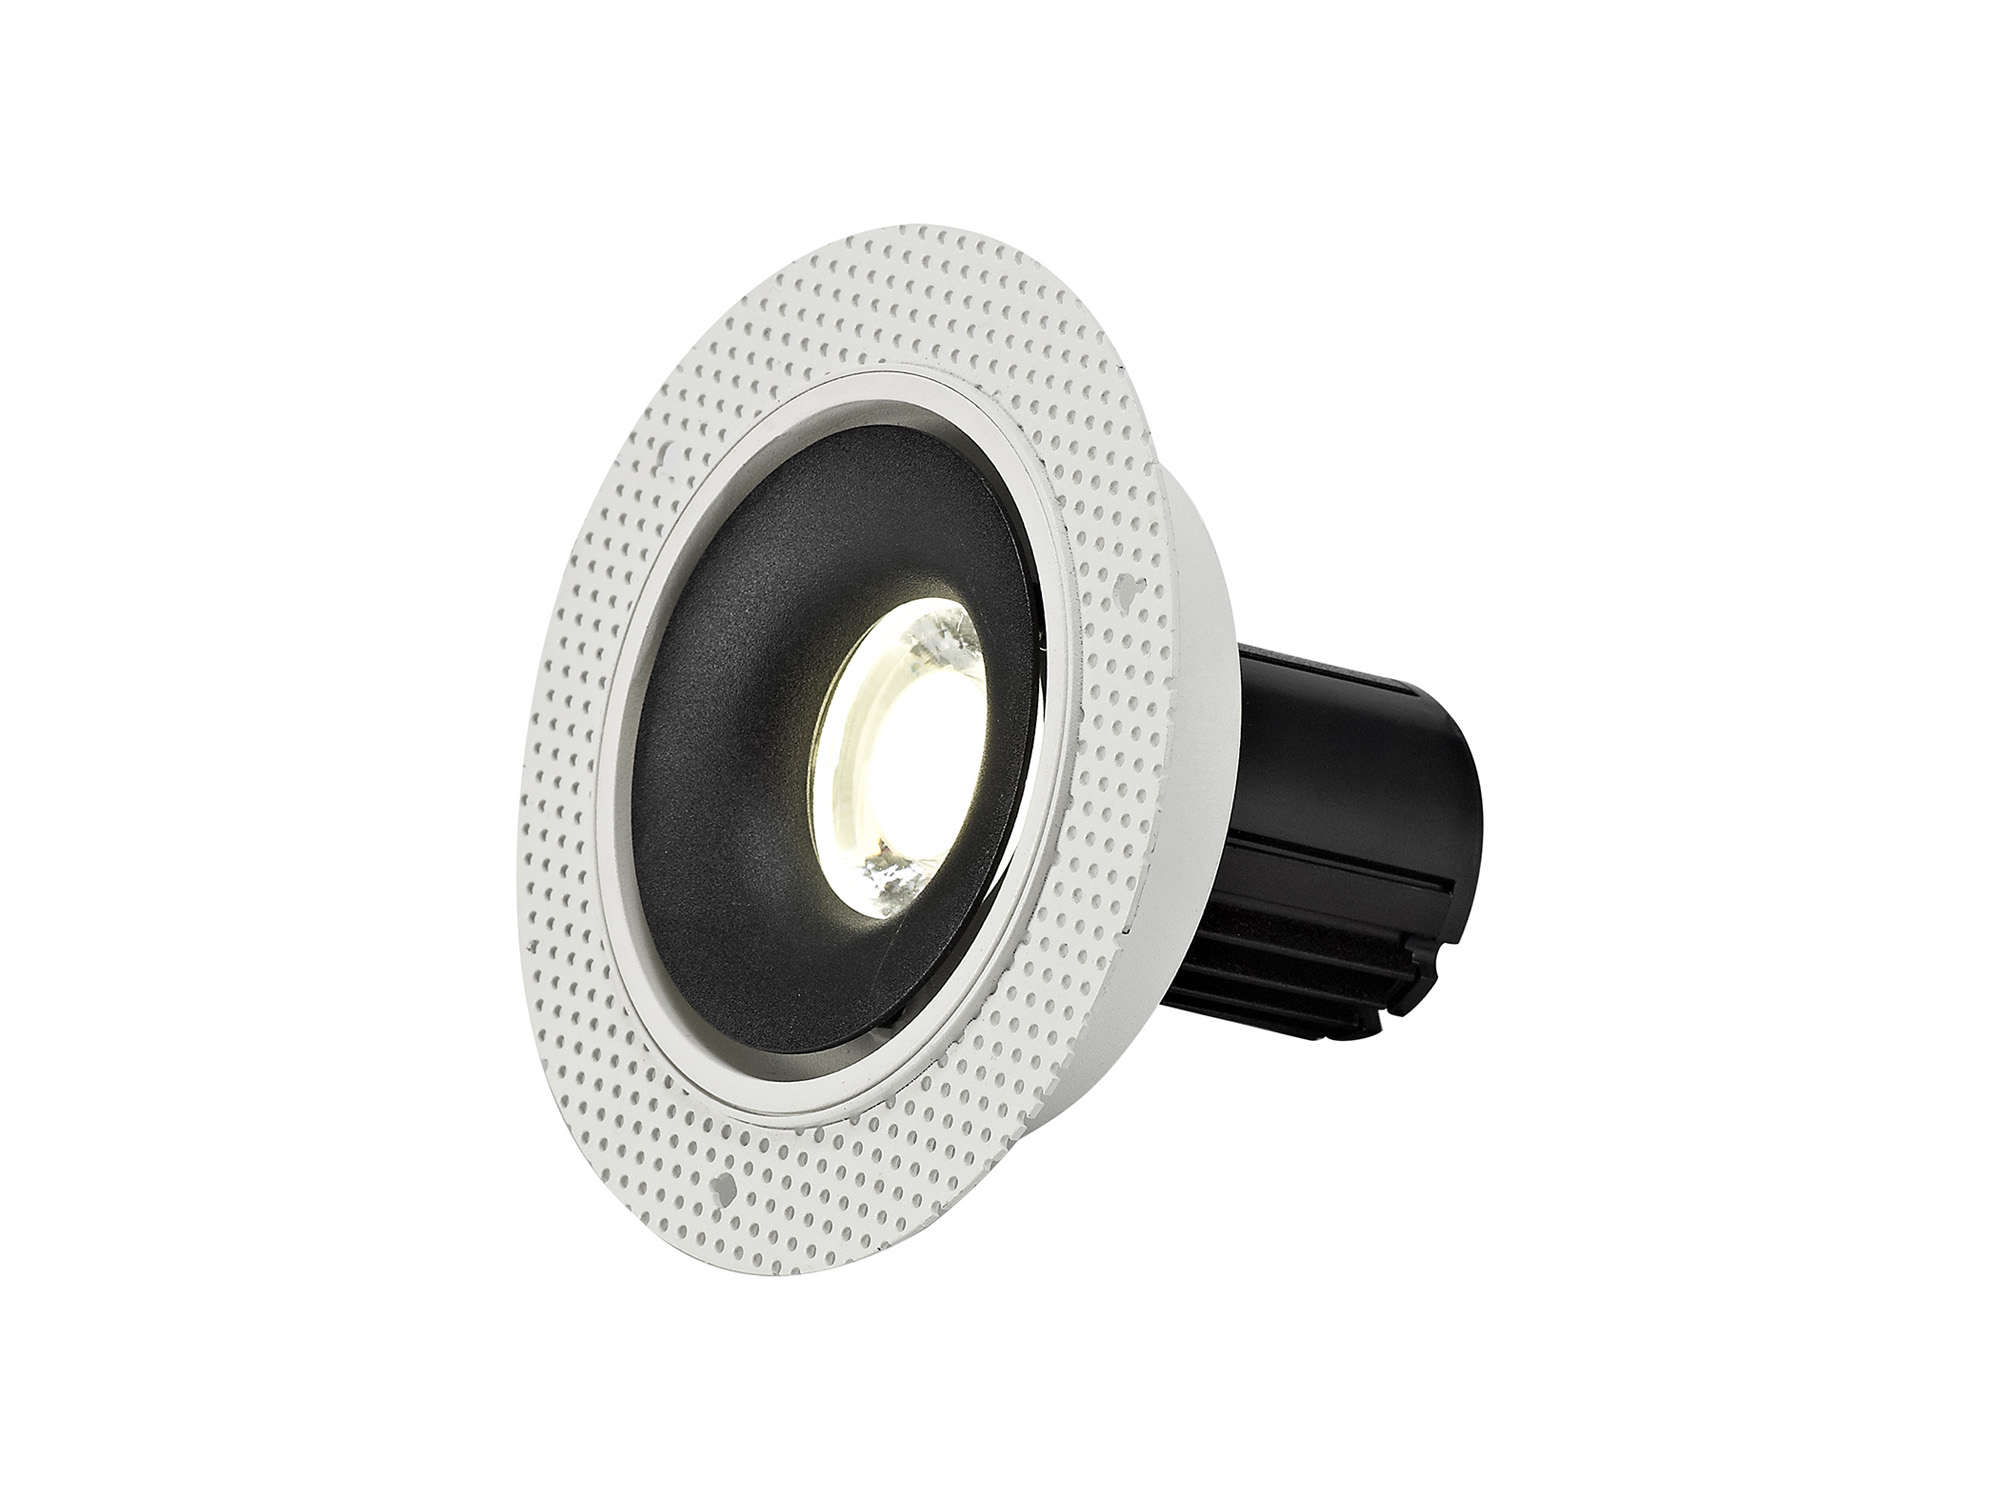 DM201096  Bolor T 10 Tridonic Powered 10W 4000K 810lm 36° CRI>90 LED Engine White/Black Trimless Fixed Recessed Spotlight, IP20